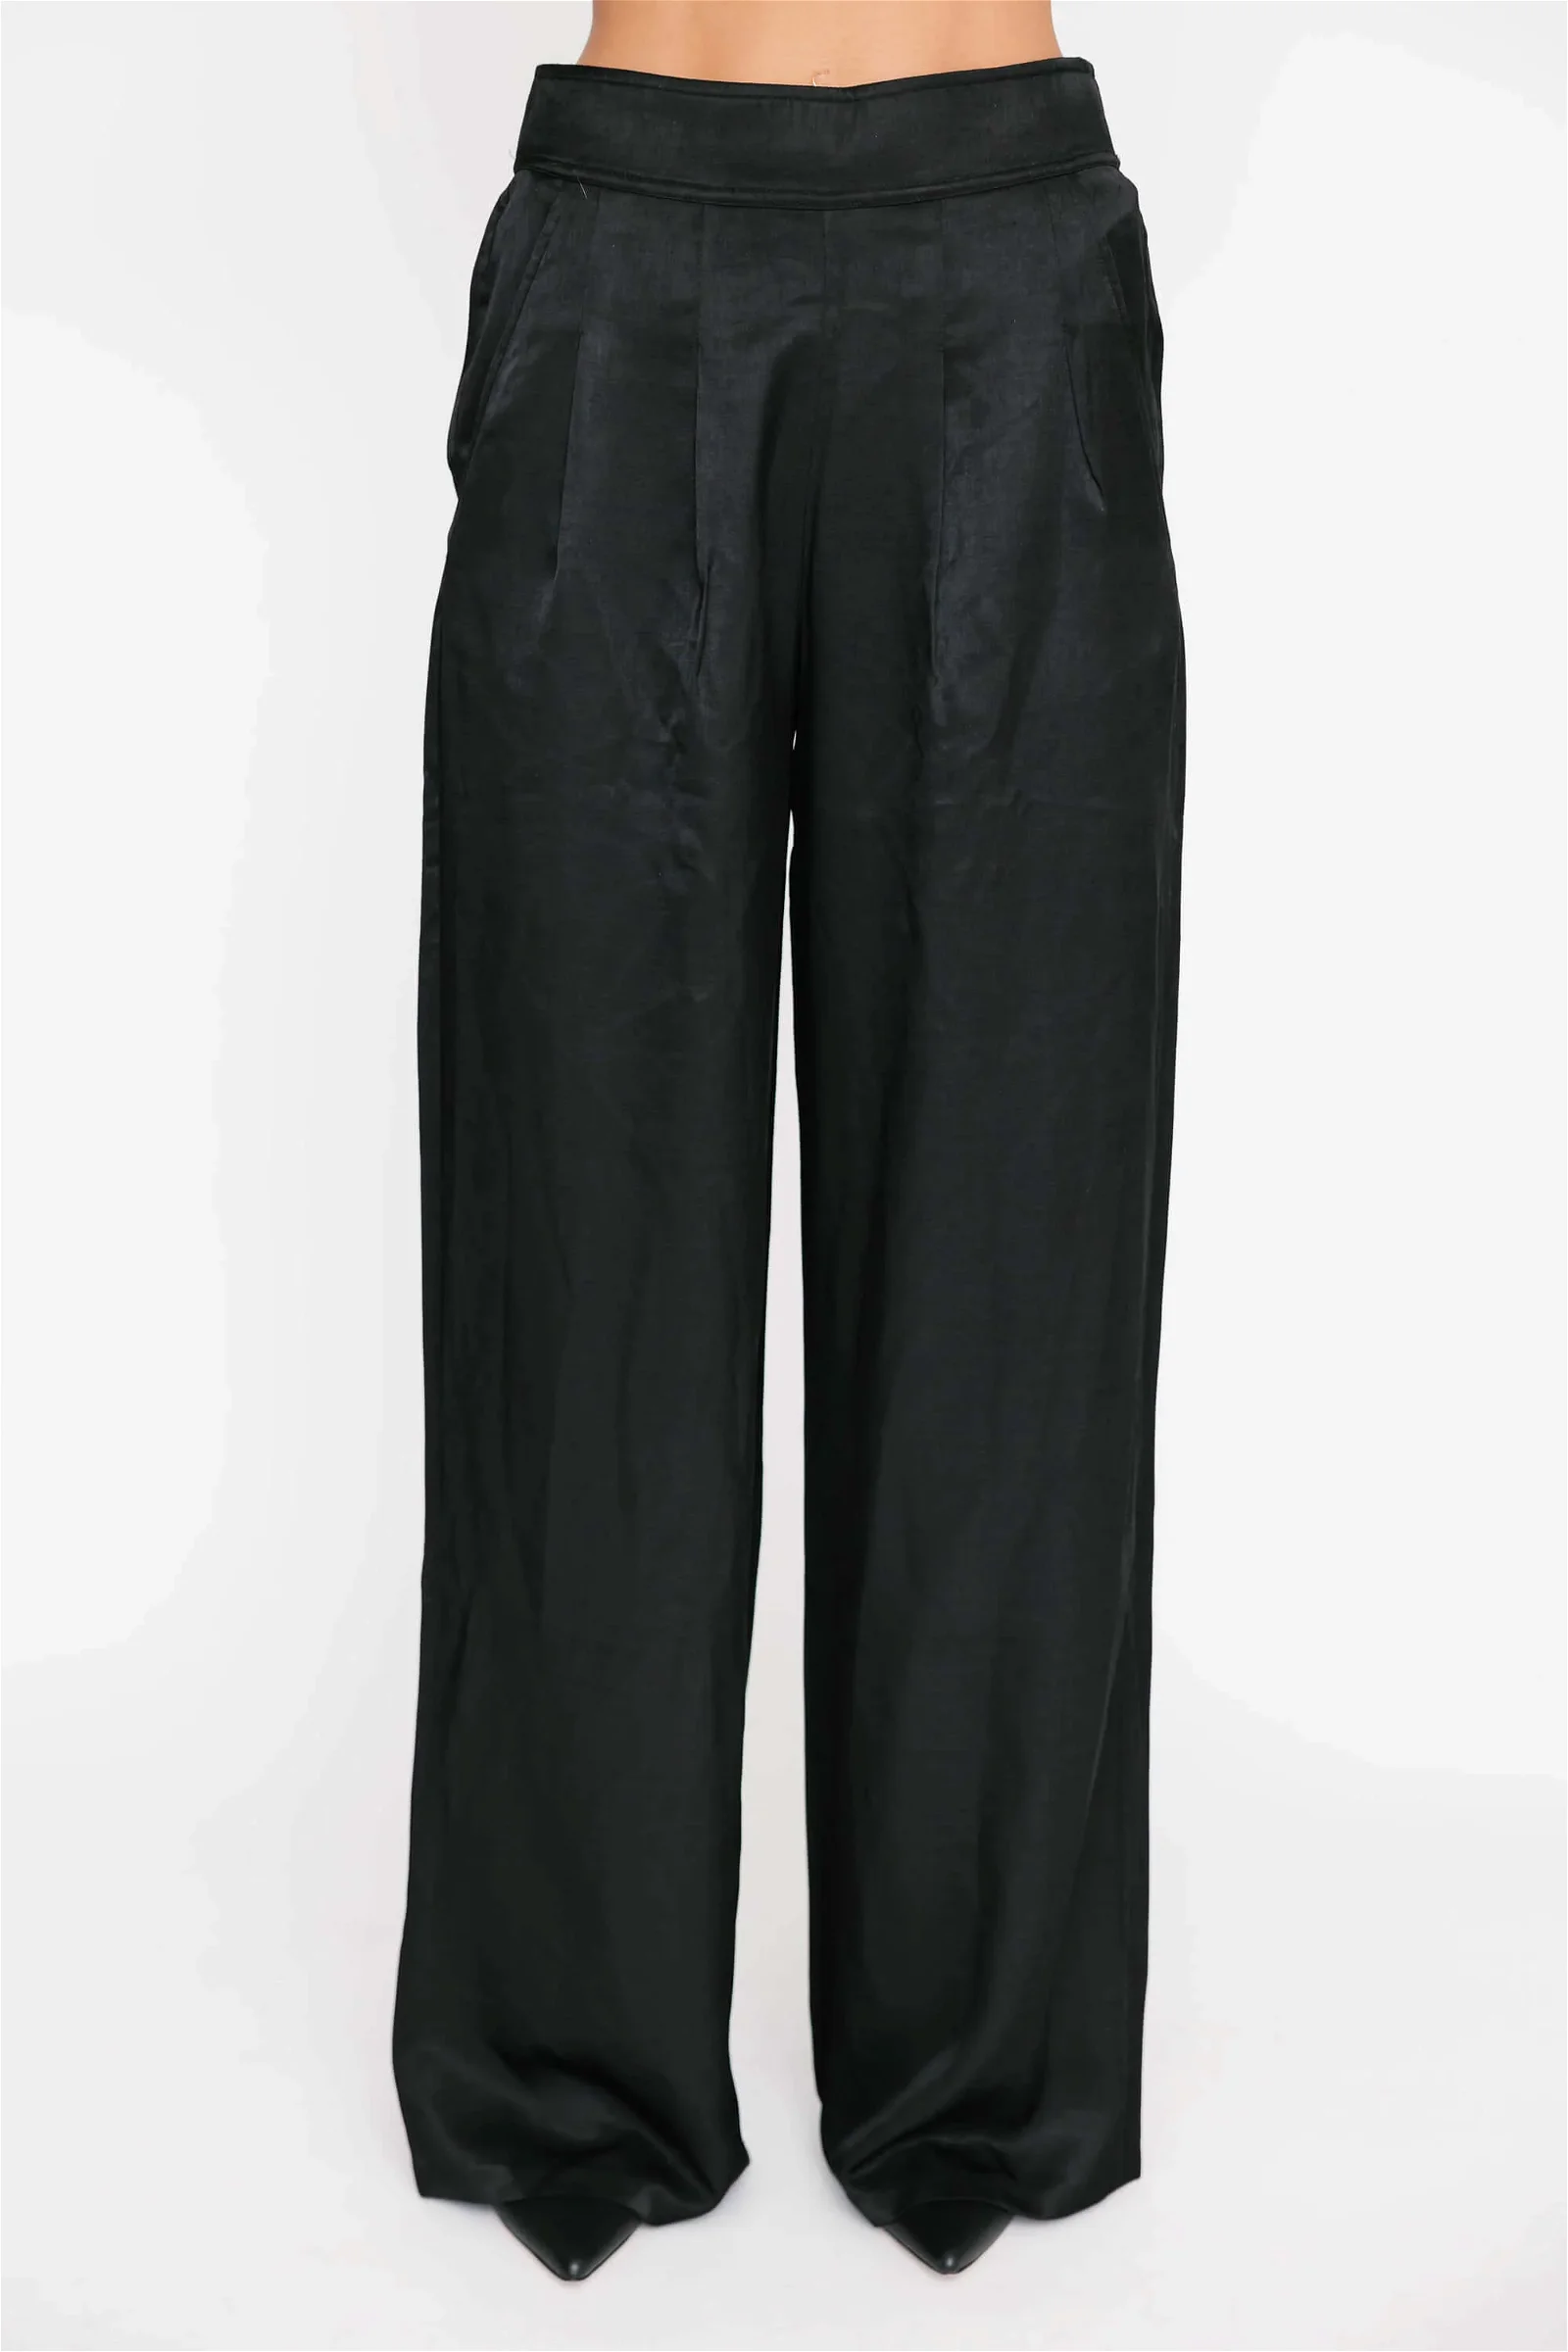 Image of Holden Wide Leg Pant in Midnight Black